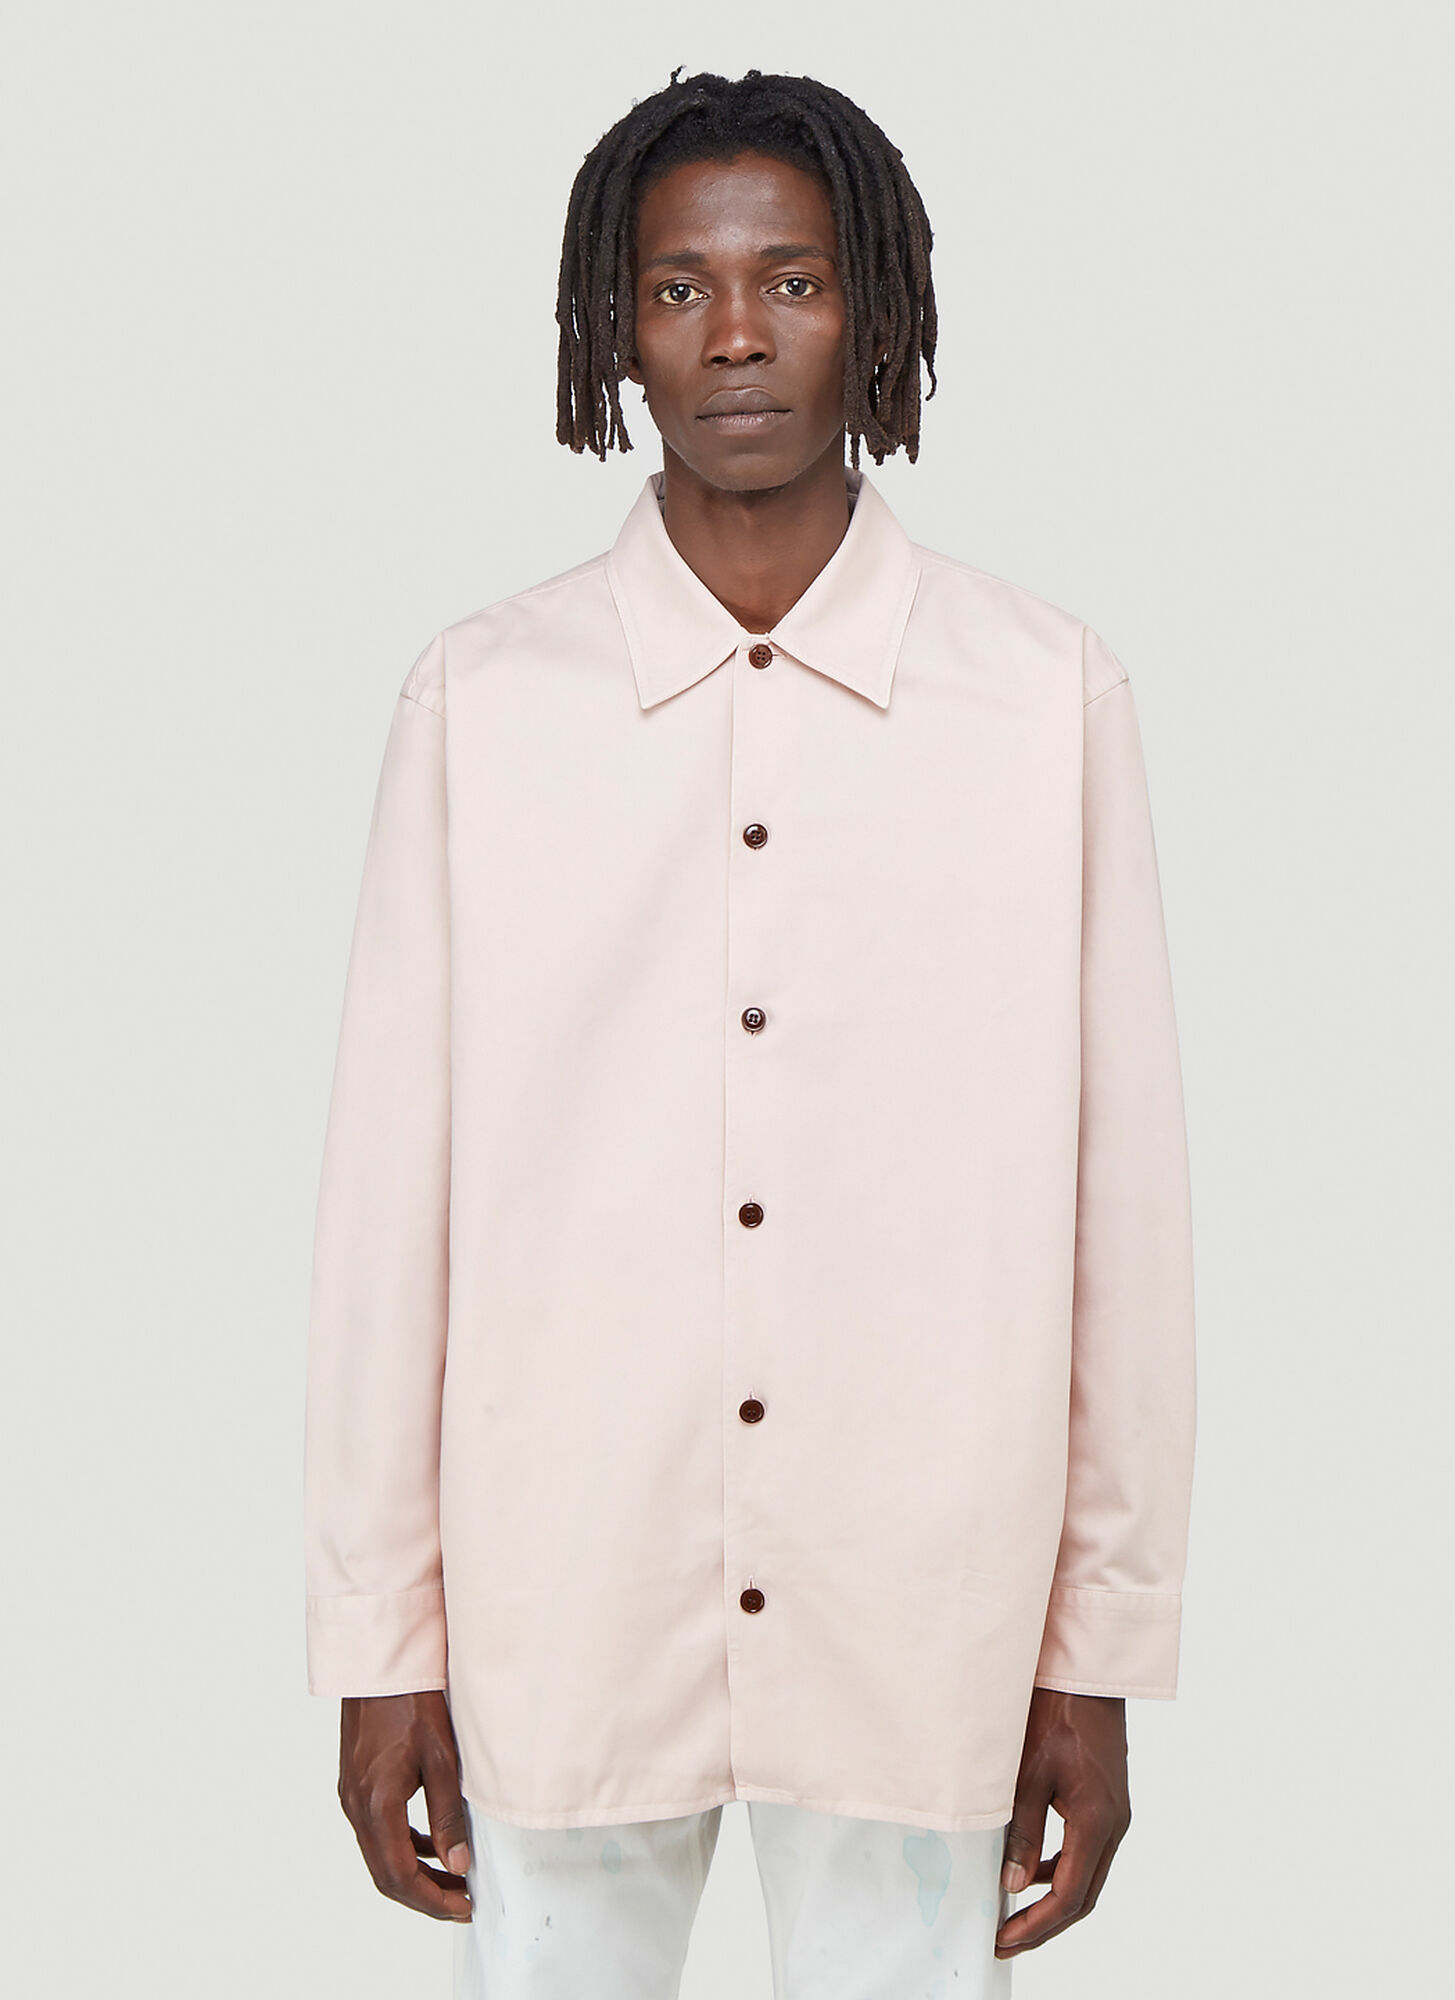 Acne Studios Boxy-Fit Twill Shirt in Pink size IT - 52 | The Fashionisto